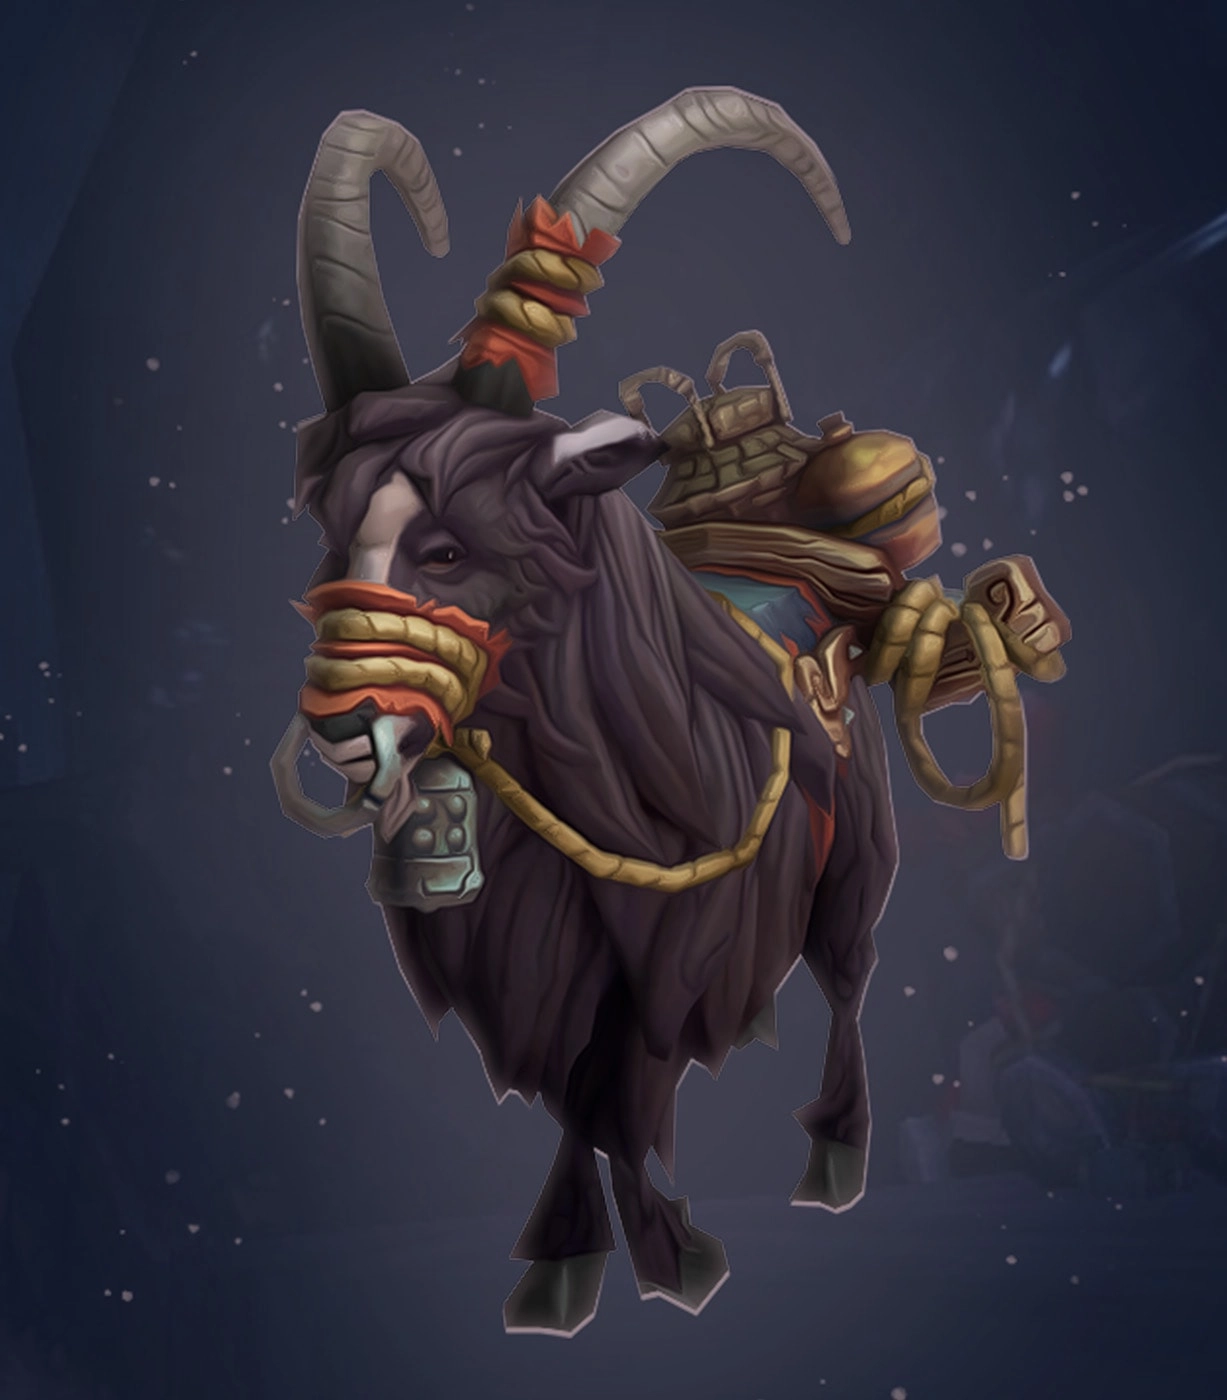 Reins of the Black Riding Goat Mount